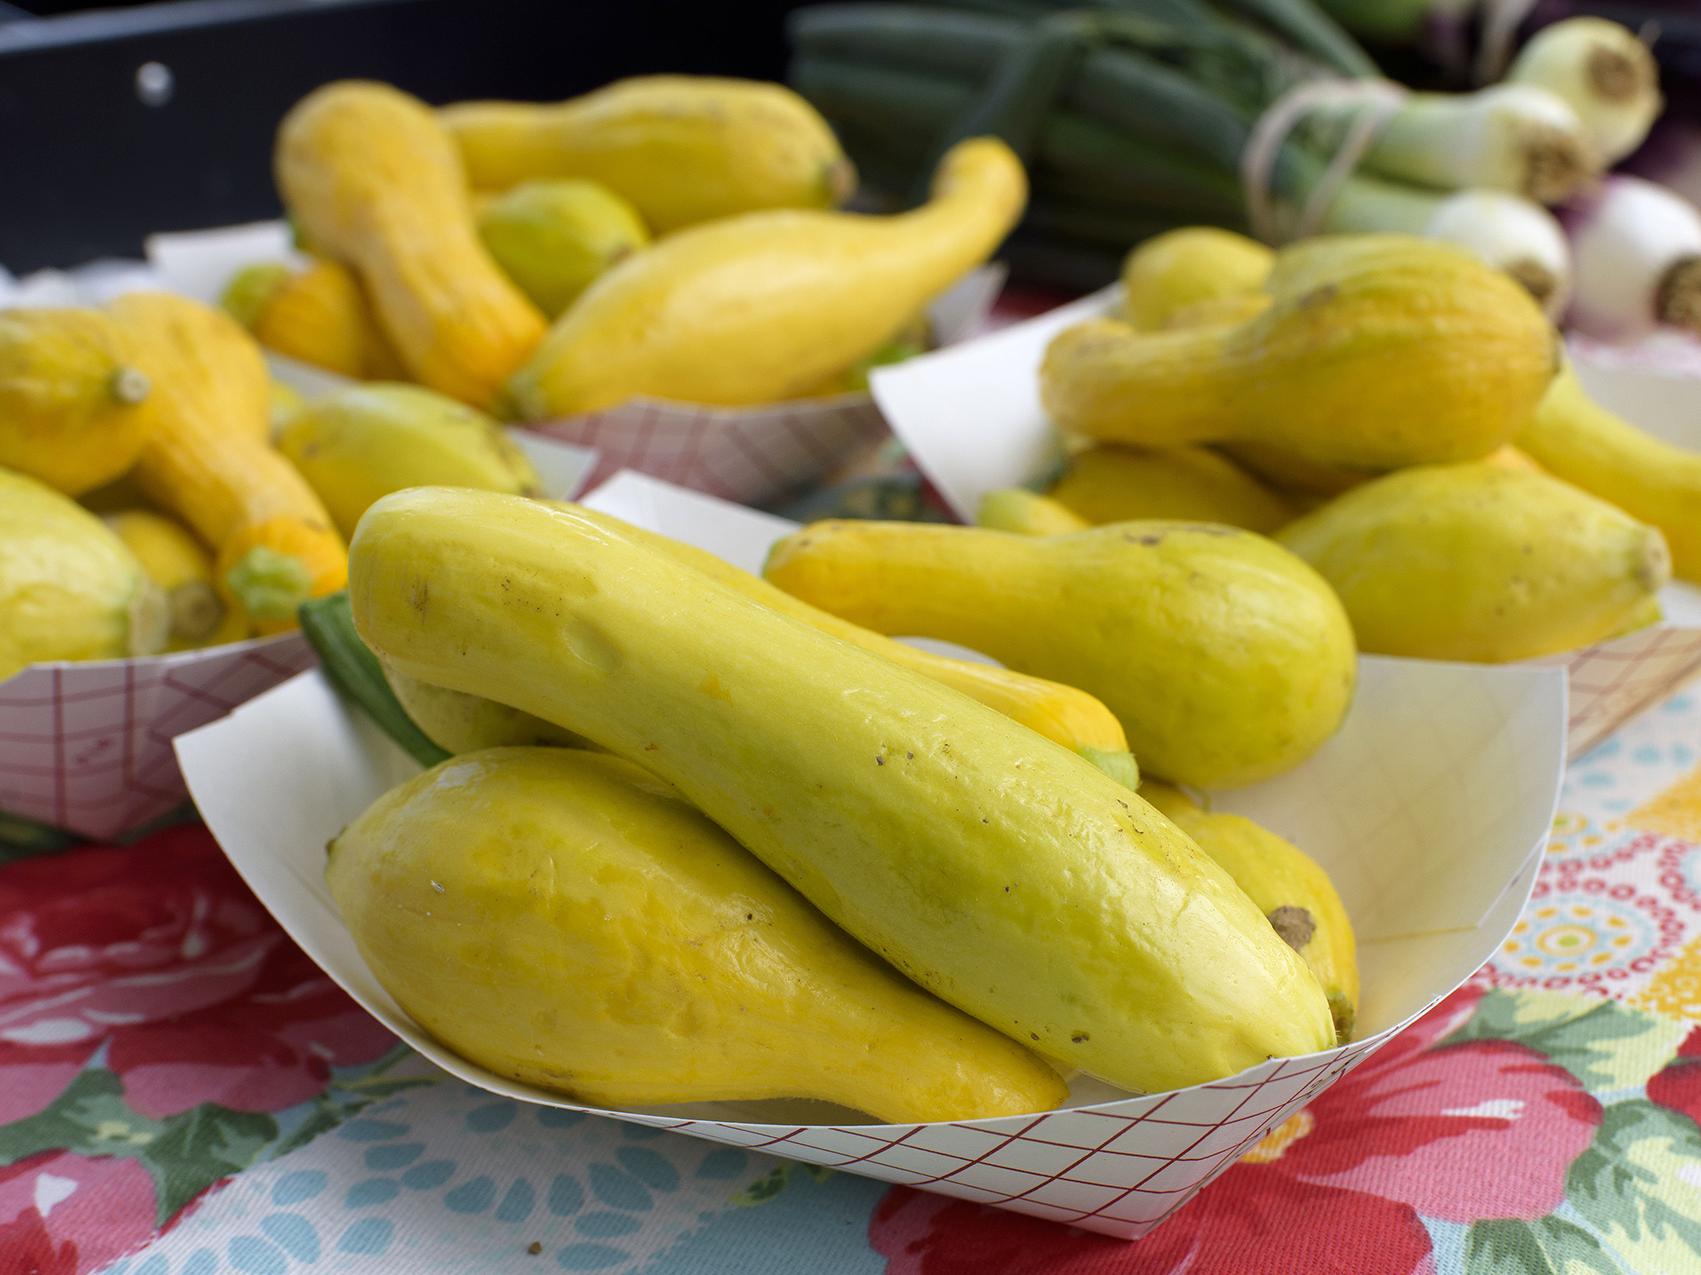 Yellow squash is among the fruits and vegetables available for purchase at the Starkville Farmers Market on May 2, 2017. Early spring temperatures allowed some truck crops producers to plant their fruit and vegetable crops a little early this year. (Photo by MSU Extension Service/Kevin Hudson)